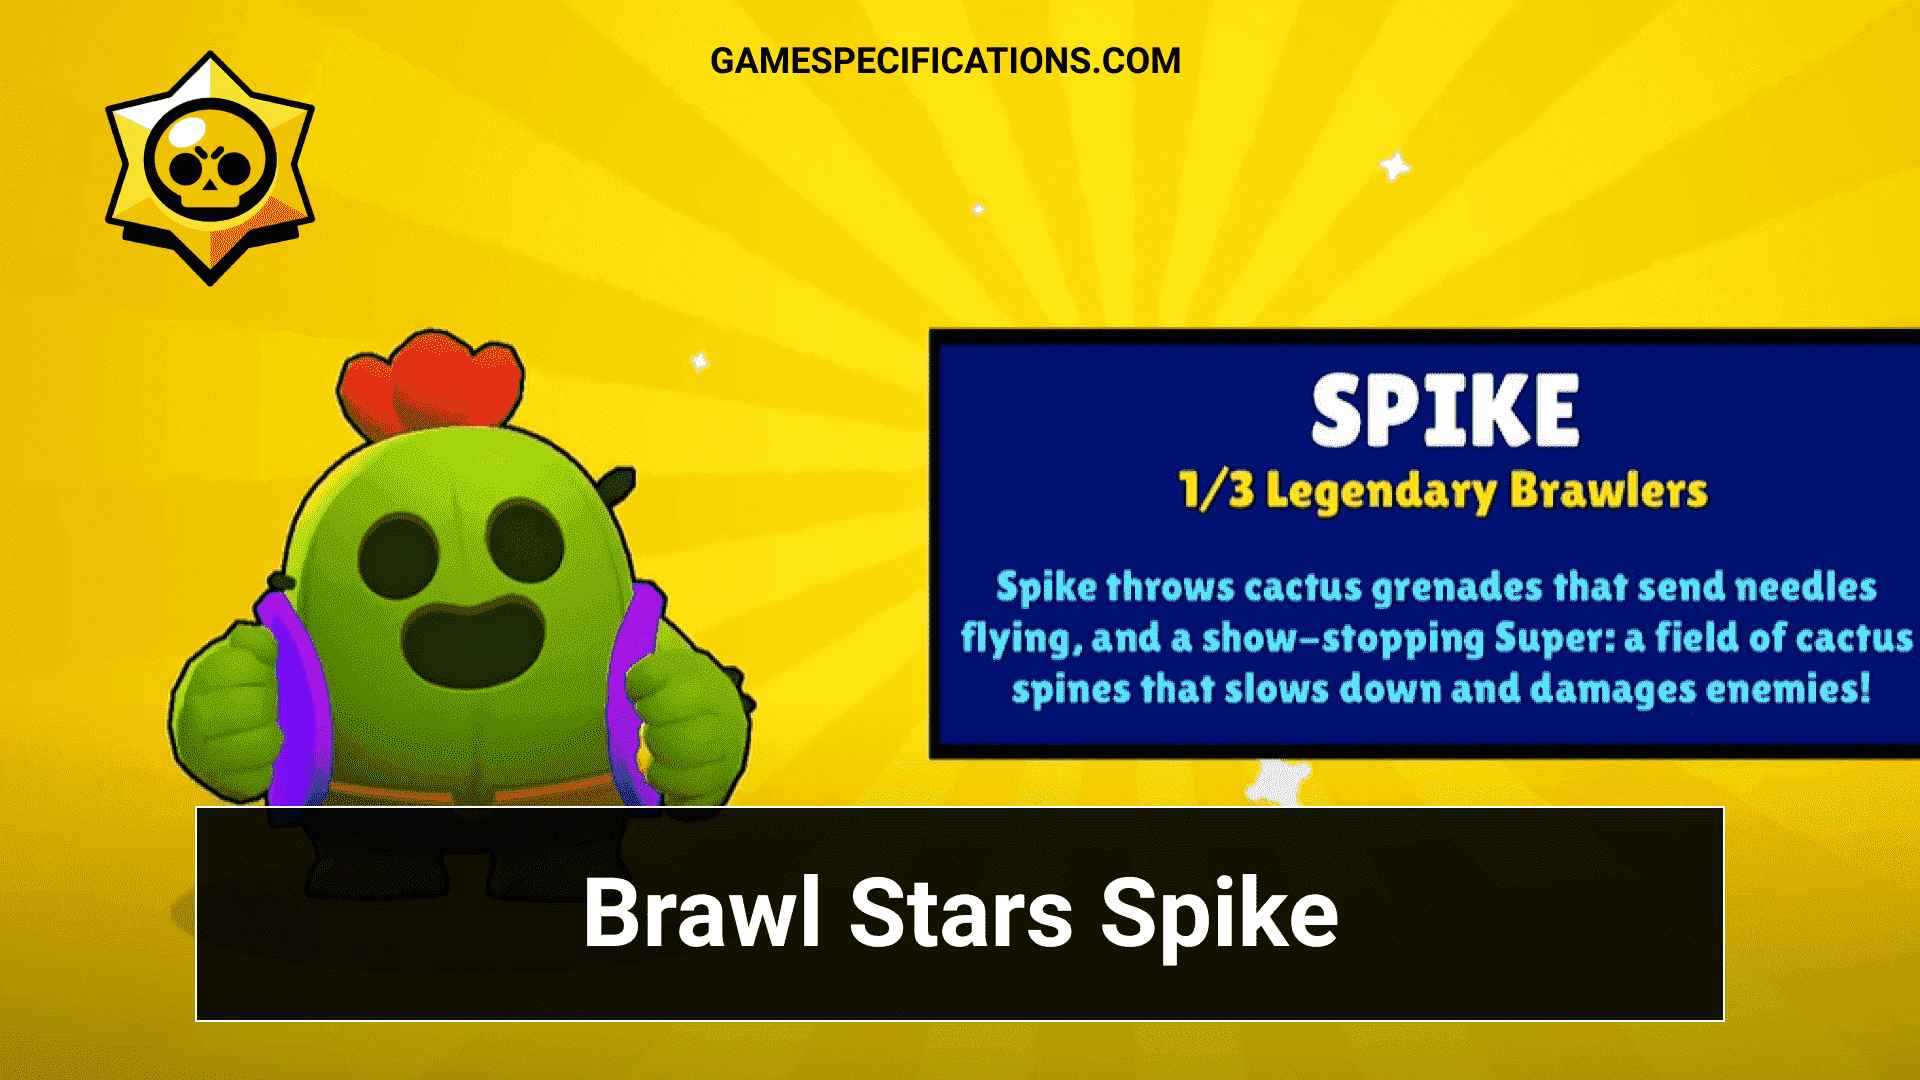 Brawl Stars Spike Introducing The Legendary Character In The Game Game Specifications - legendary brawlers brawl stars wallpaper 2020